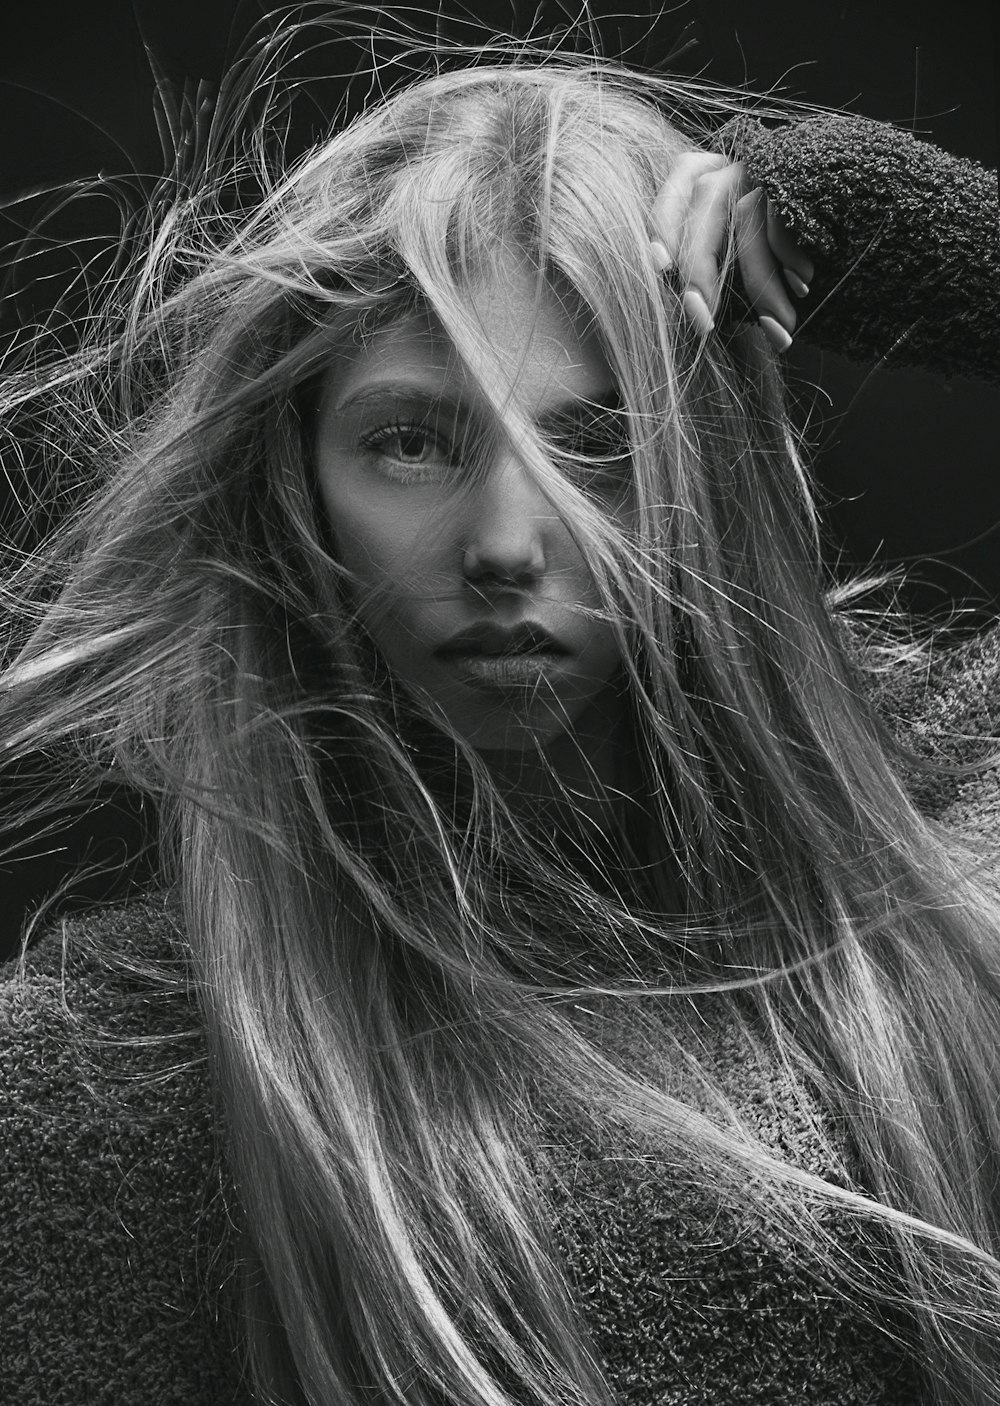 grayscale photo of woman with long hair